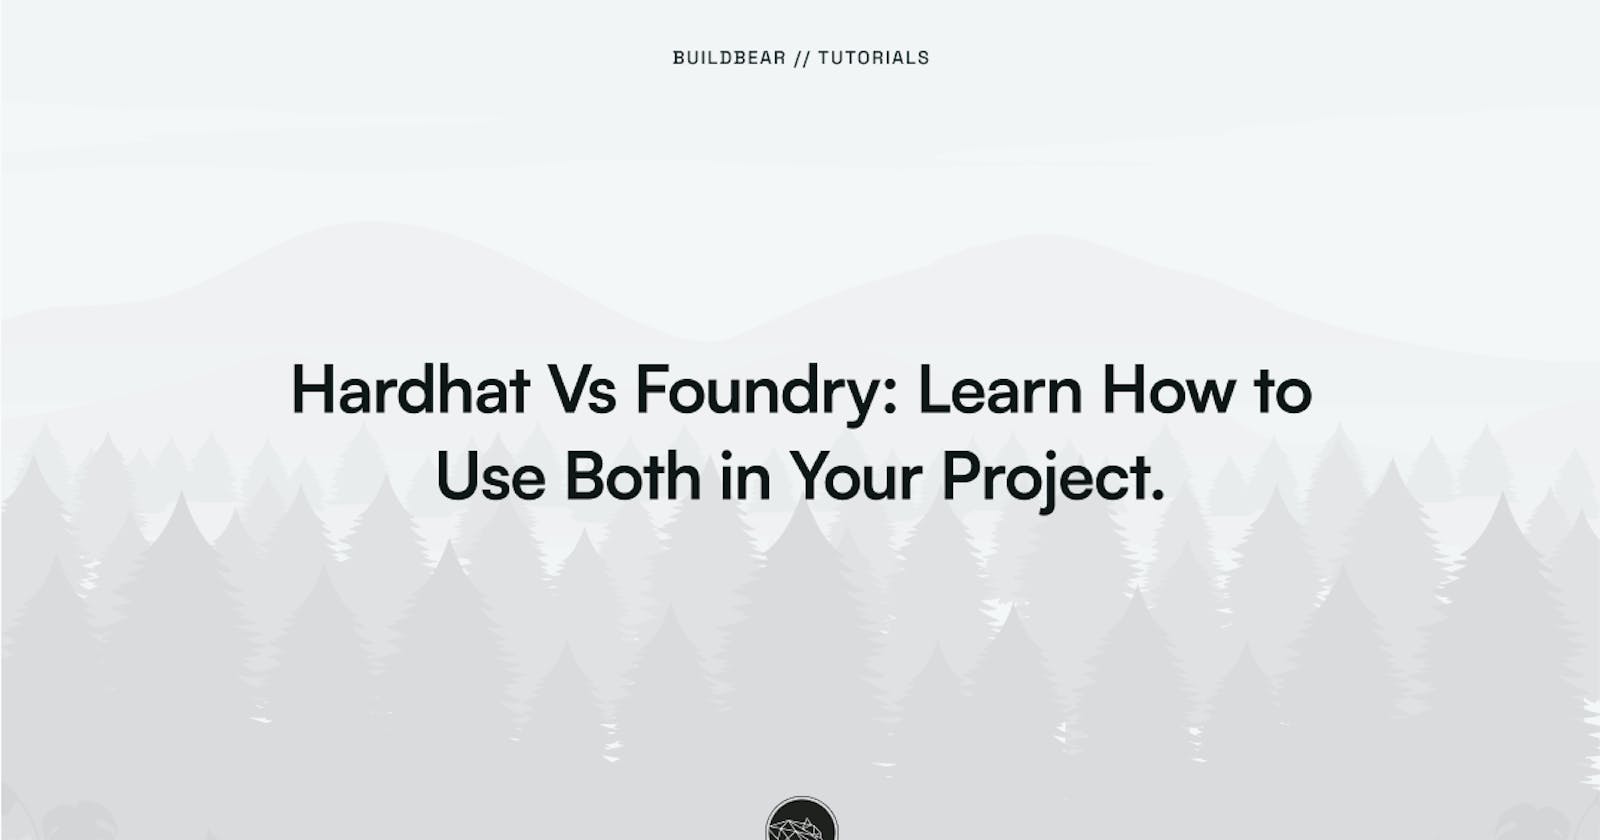 Hardhat Vs Foundry: Learn How to Use Both in Your Project